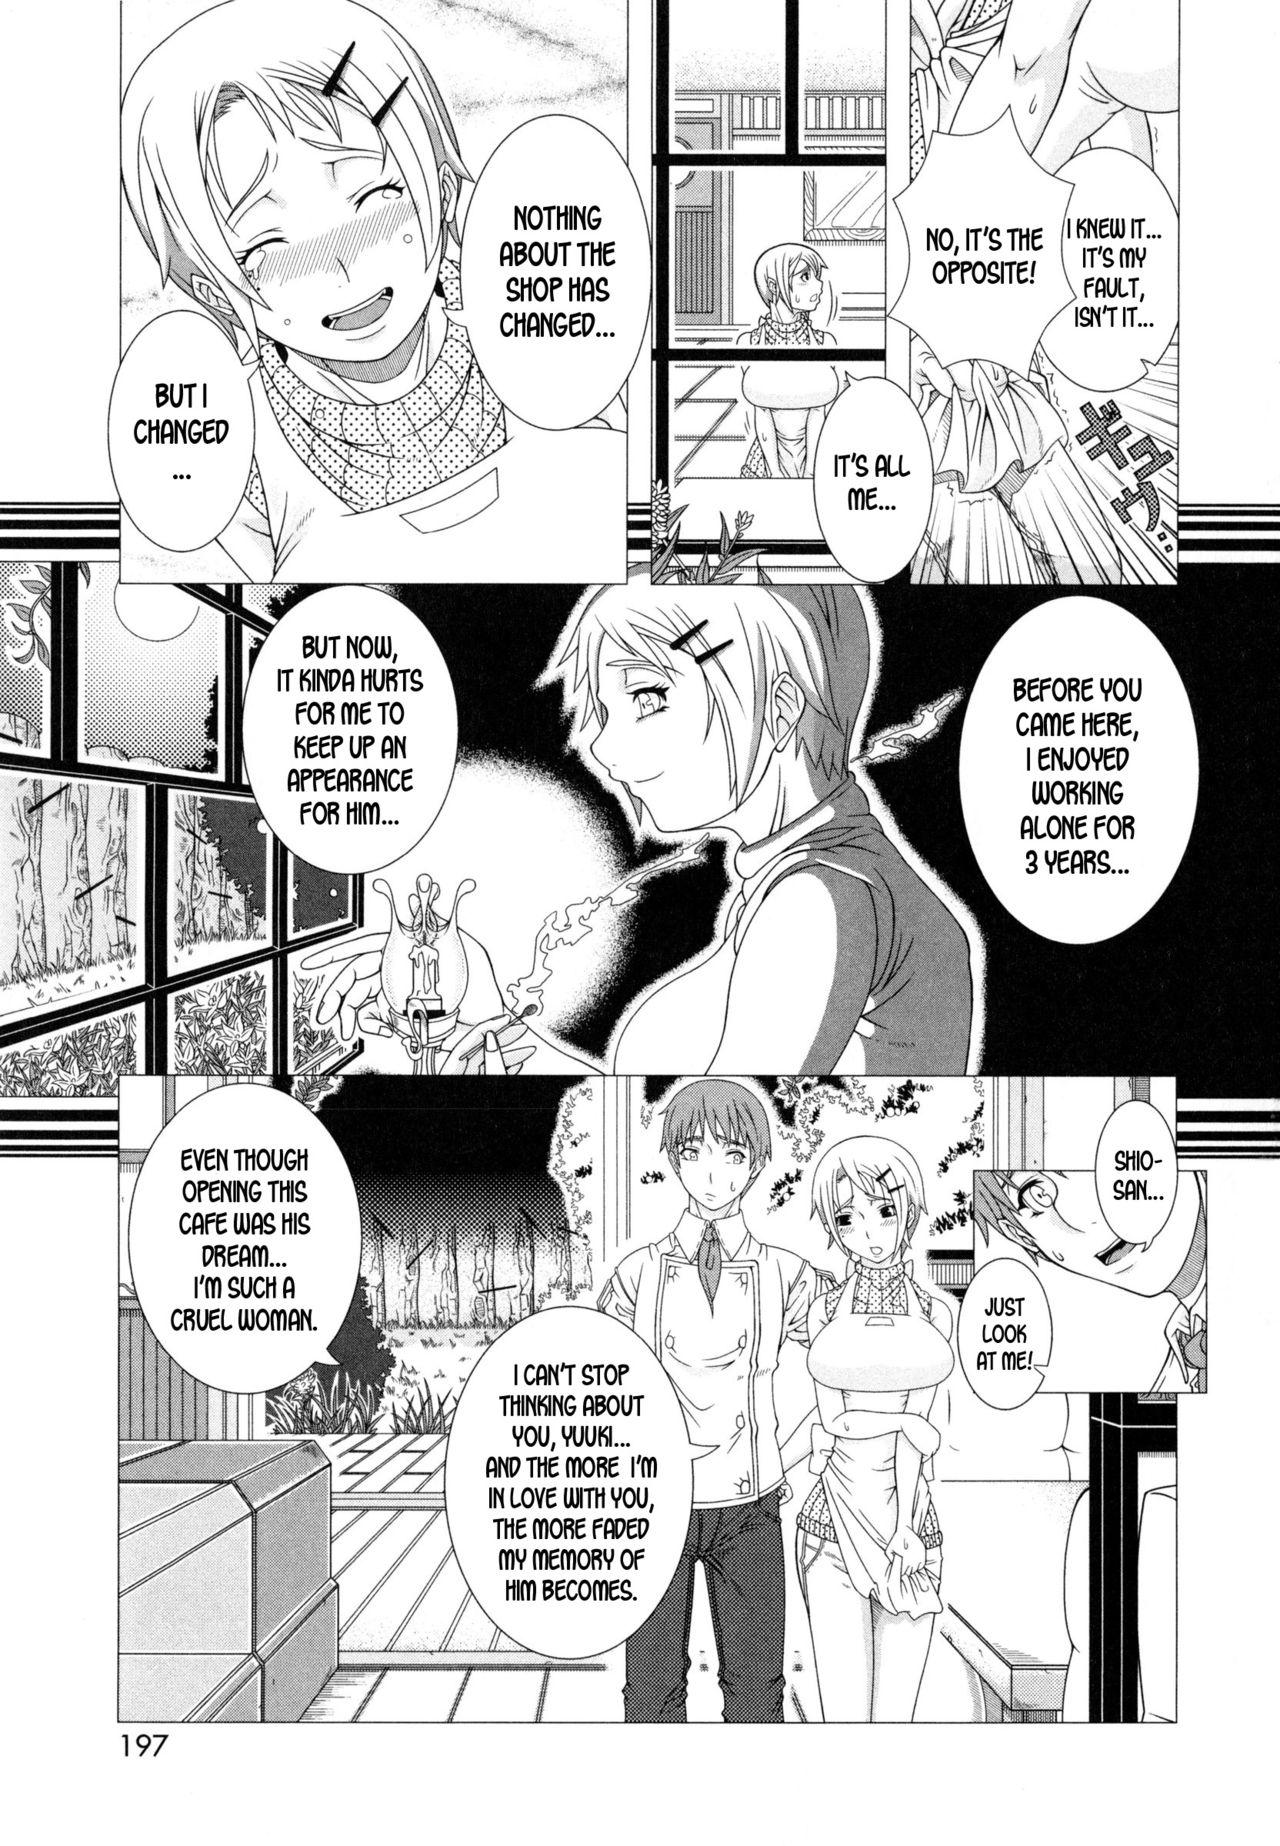 Mas Futari no Jikan | Our Time Together Yanks Featured - Page 7